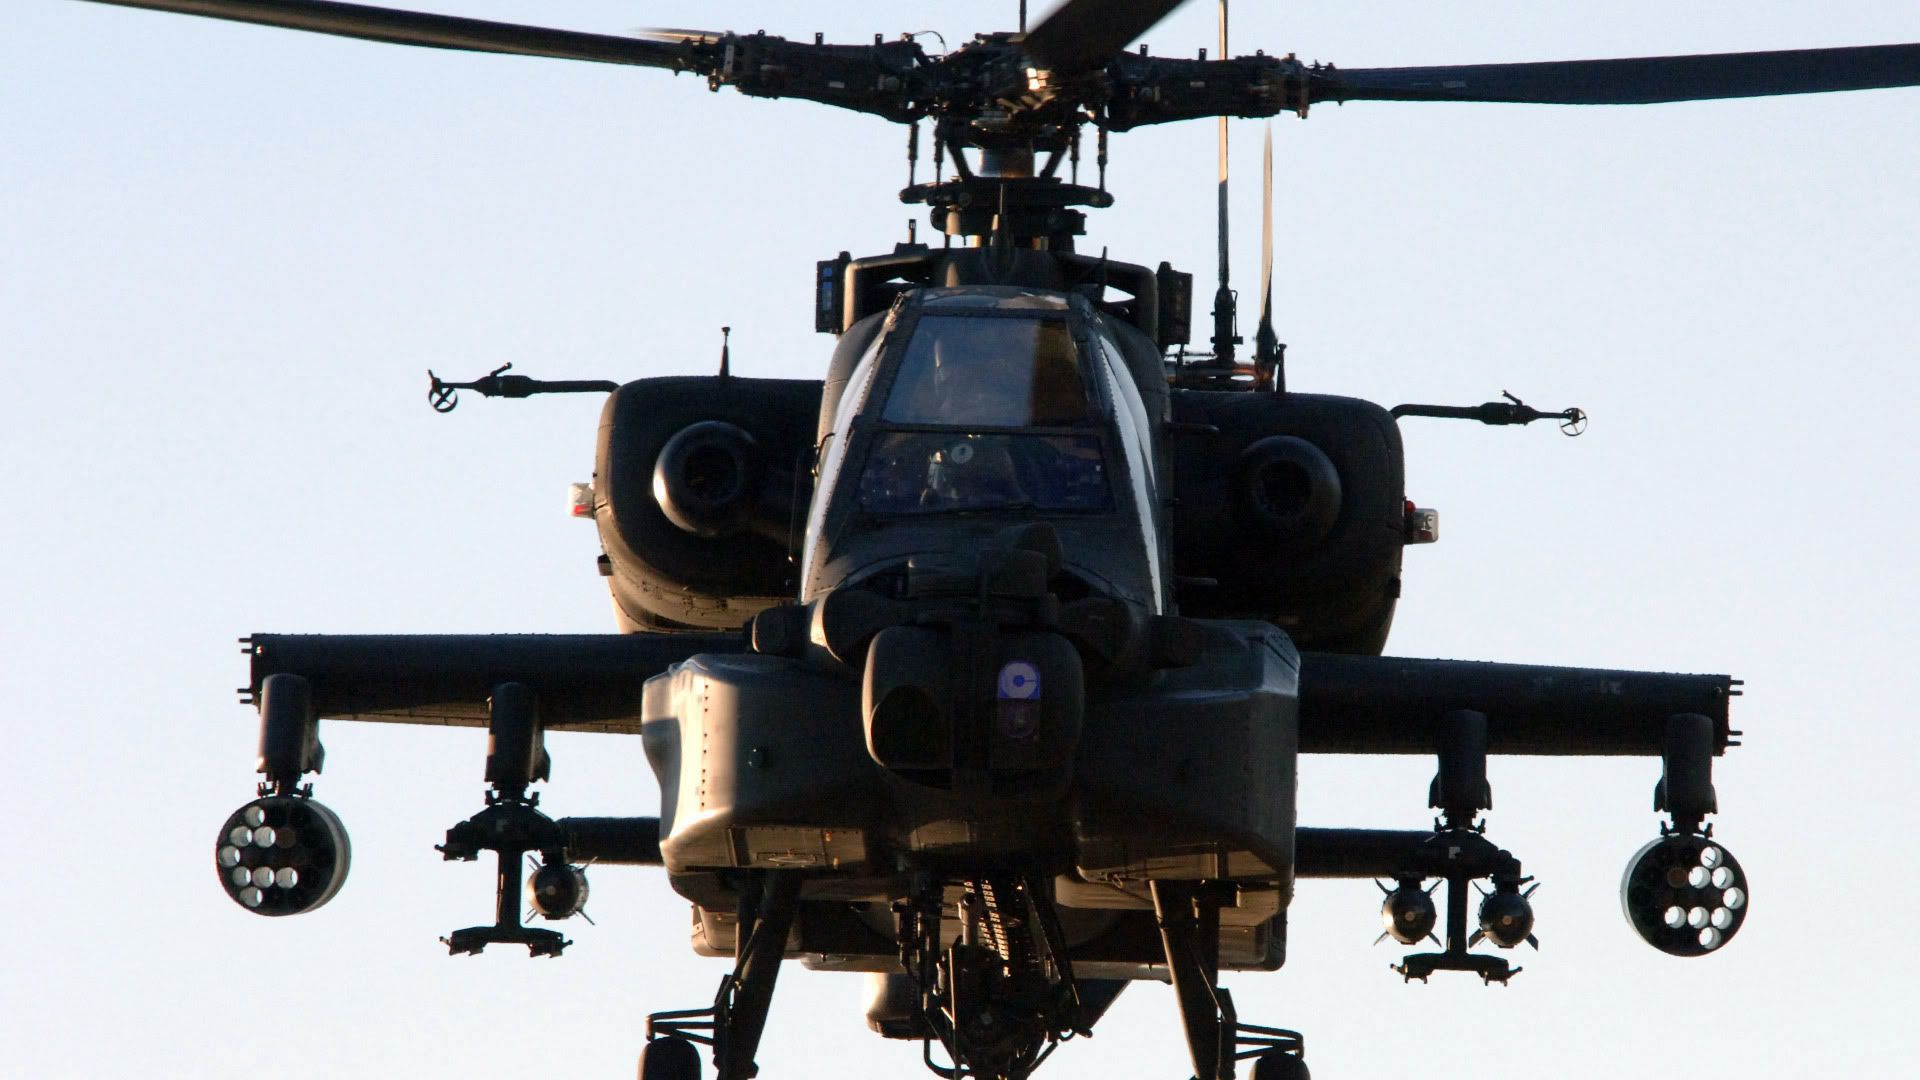 Apache - Apache Helicopters Hd - 1920x1080 Wallpaper 